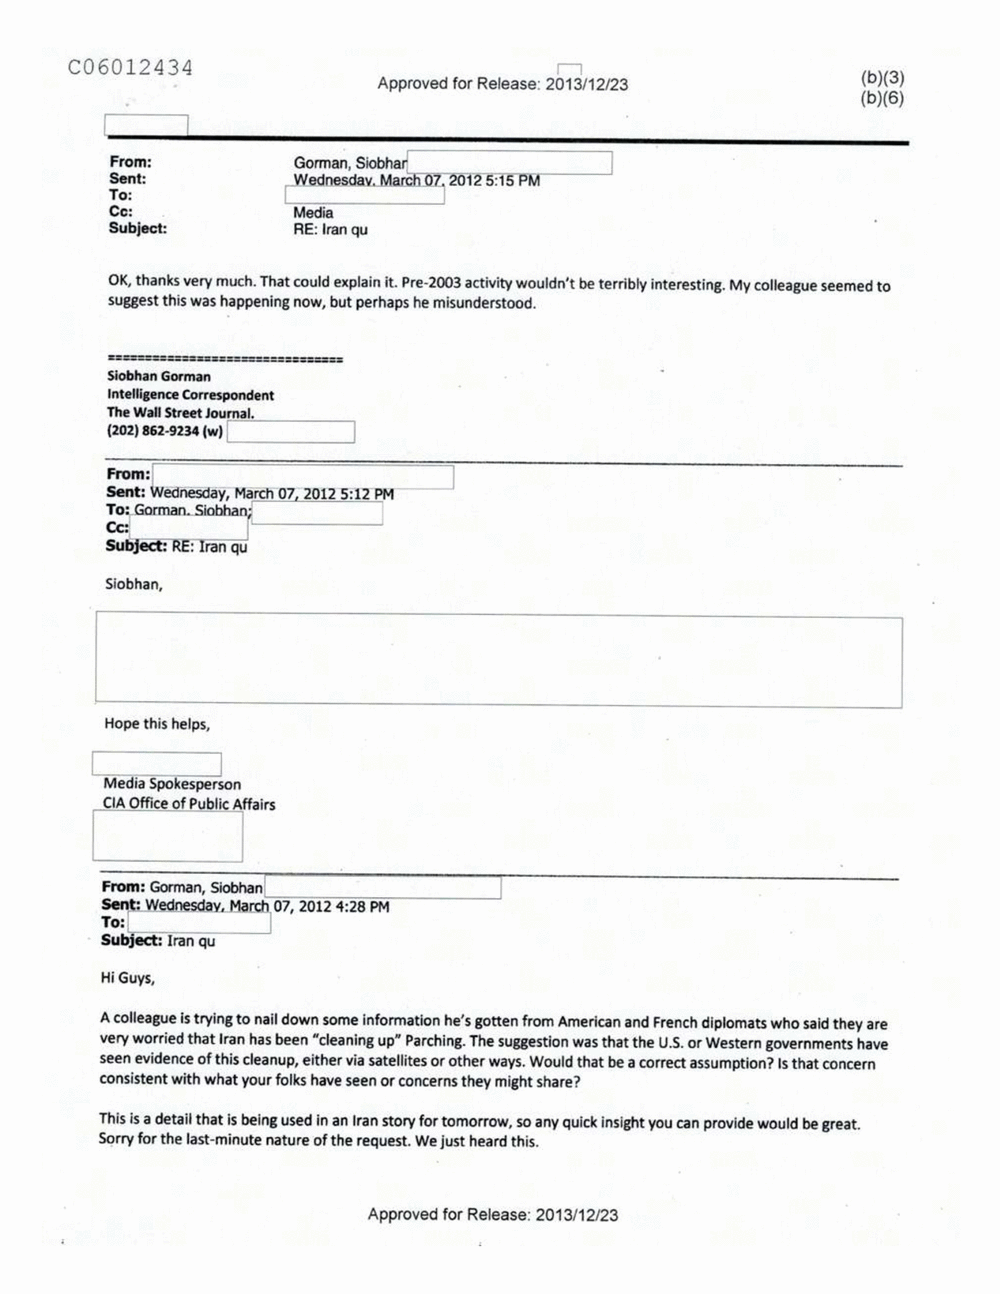 Page 13 from Email Correspondence Between Reporters and CIA Flacks